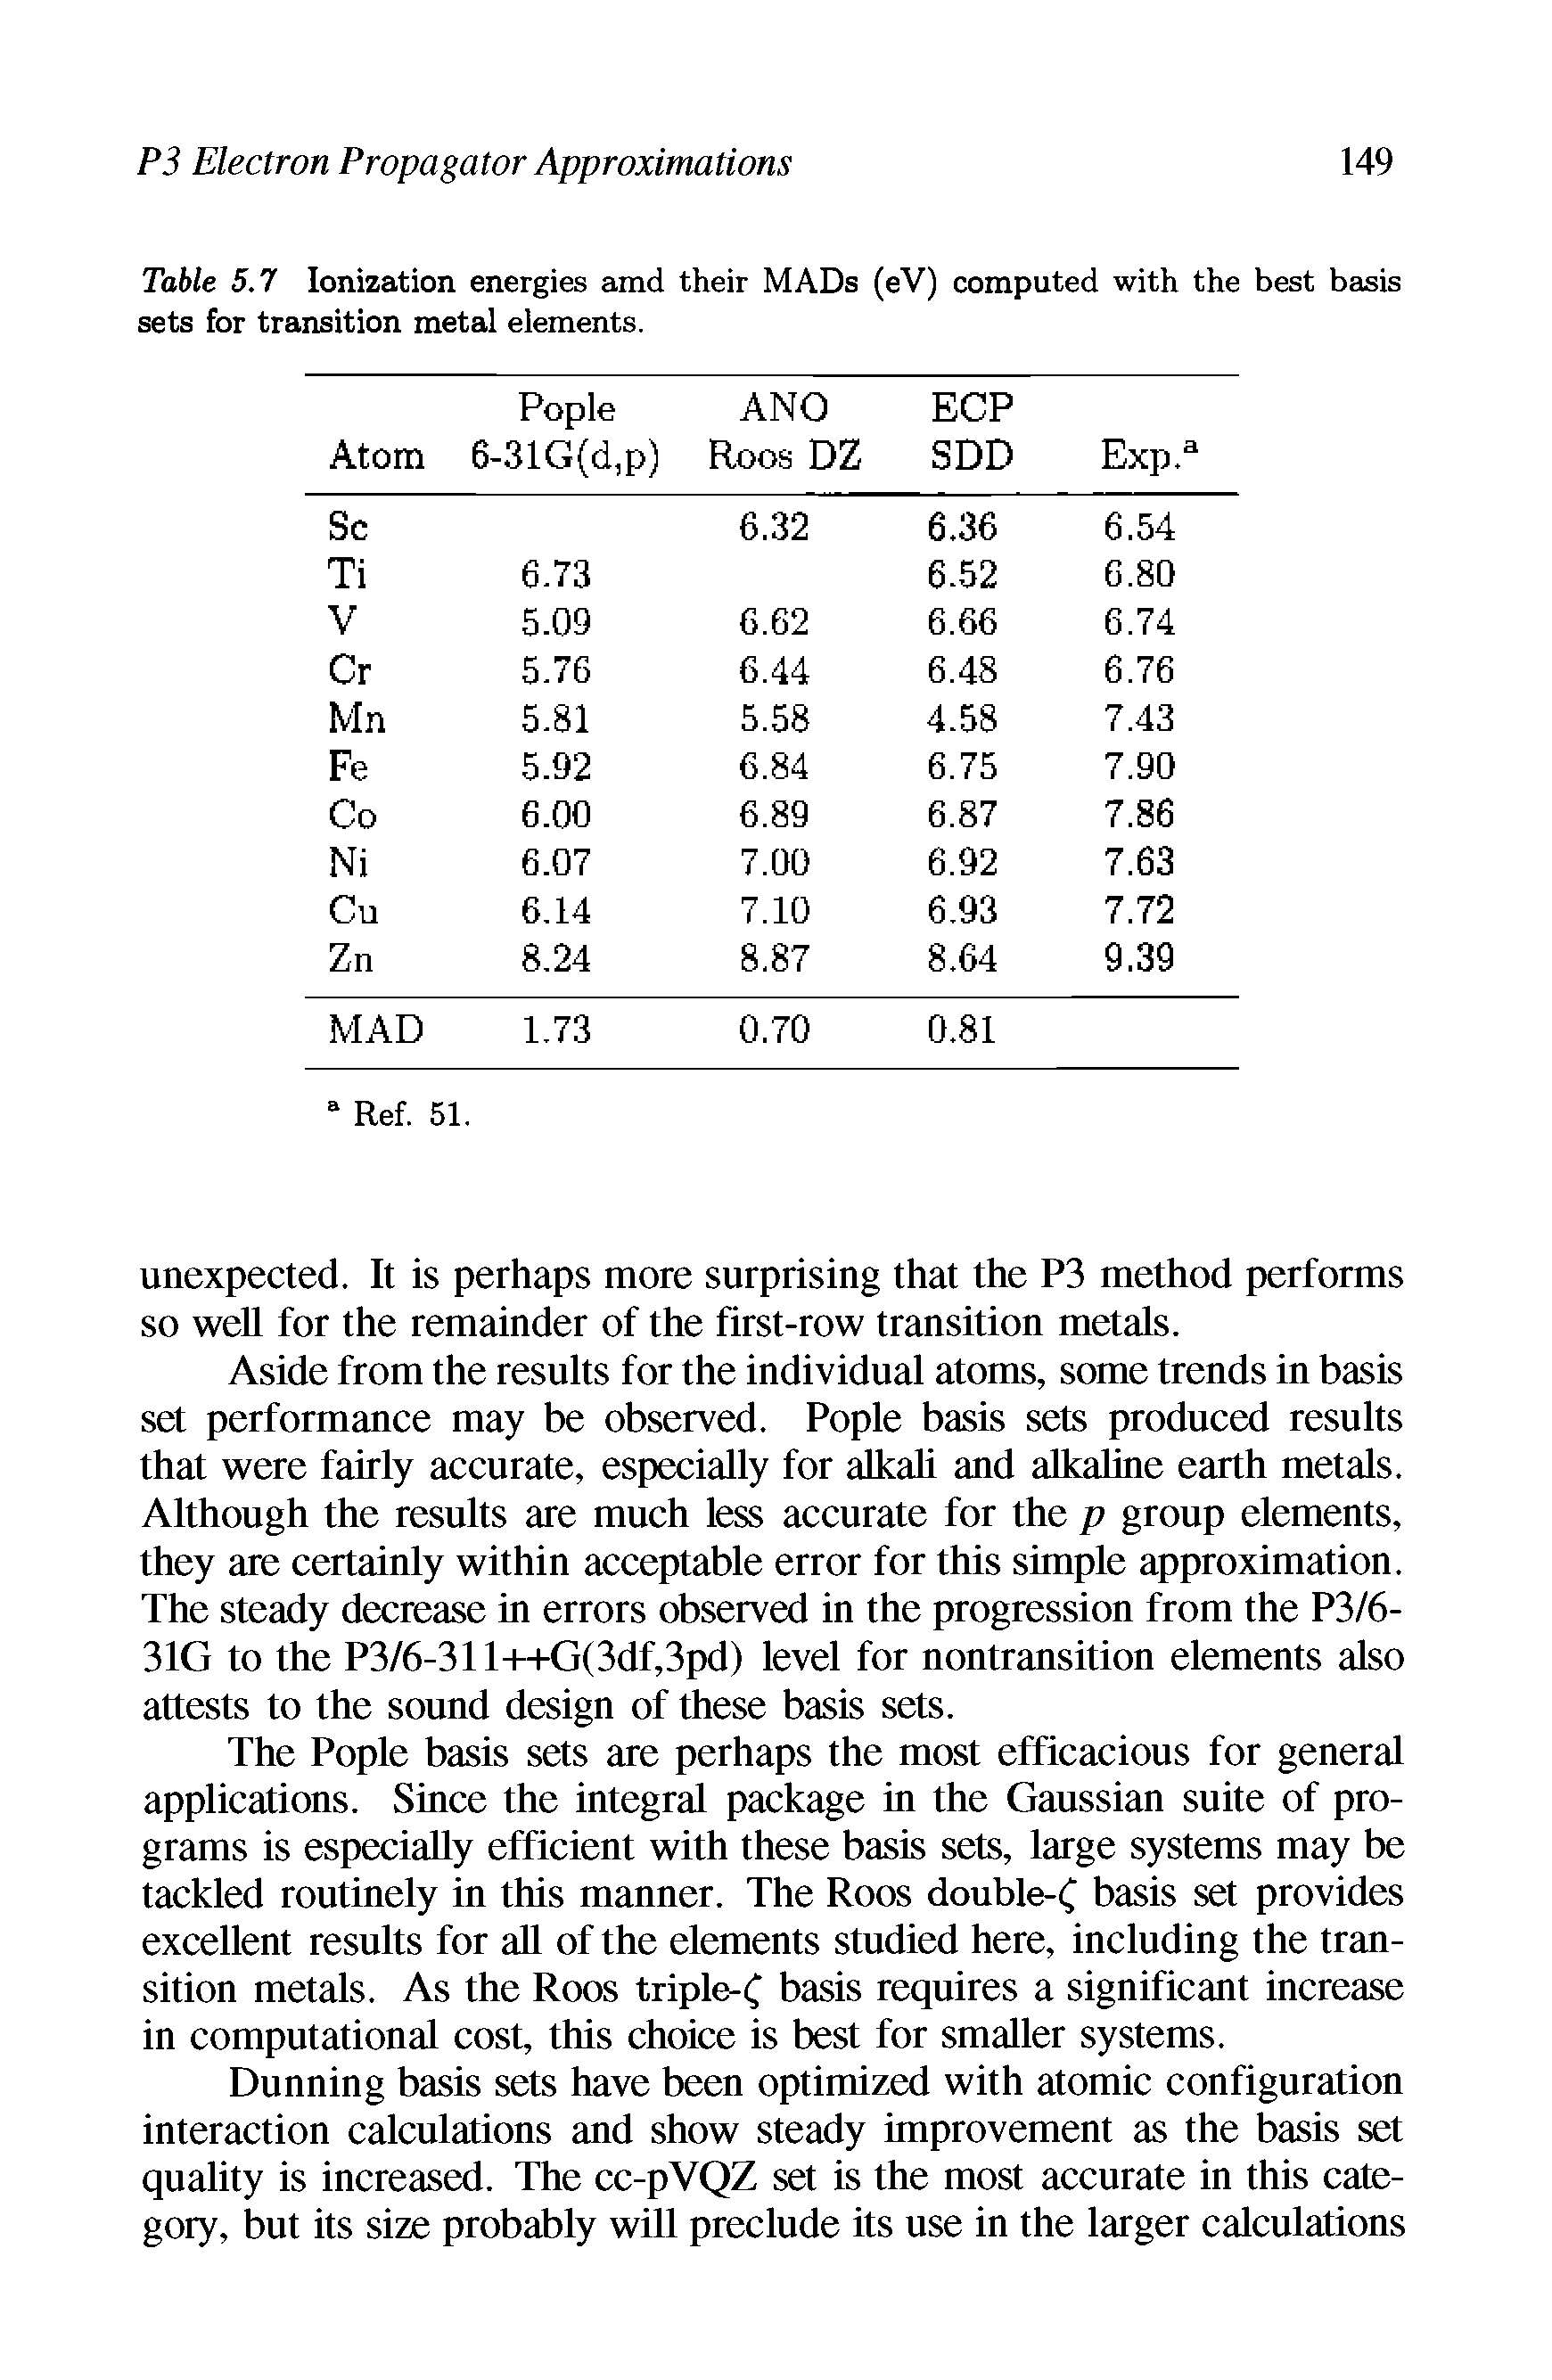 Table 5.7 Ionization energies amd their MADs (eV) computed with the best basis sets for transition metal elements.